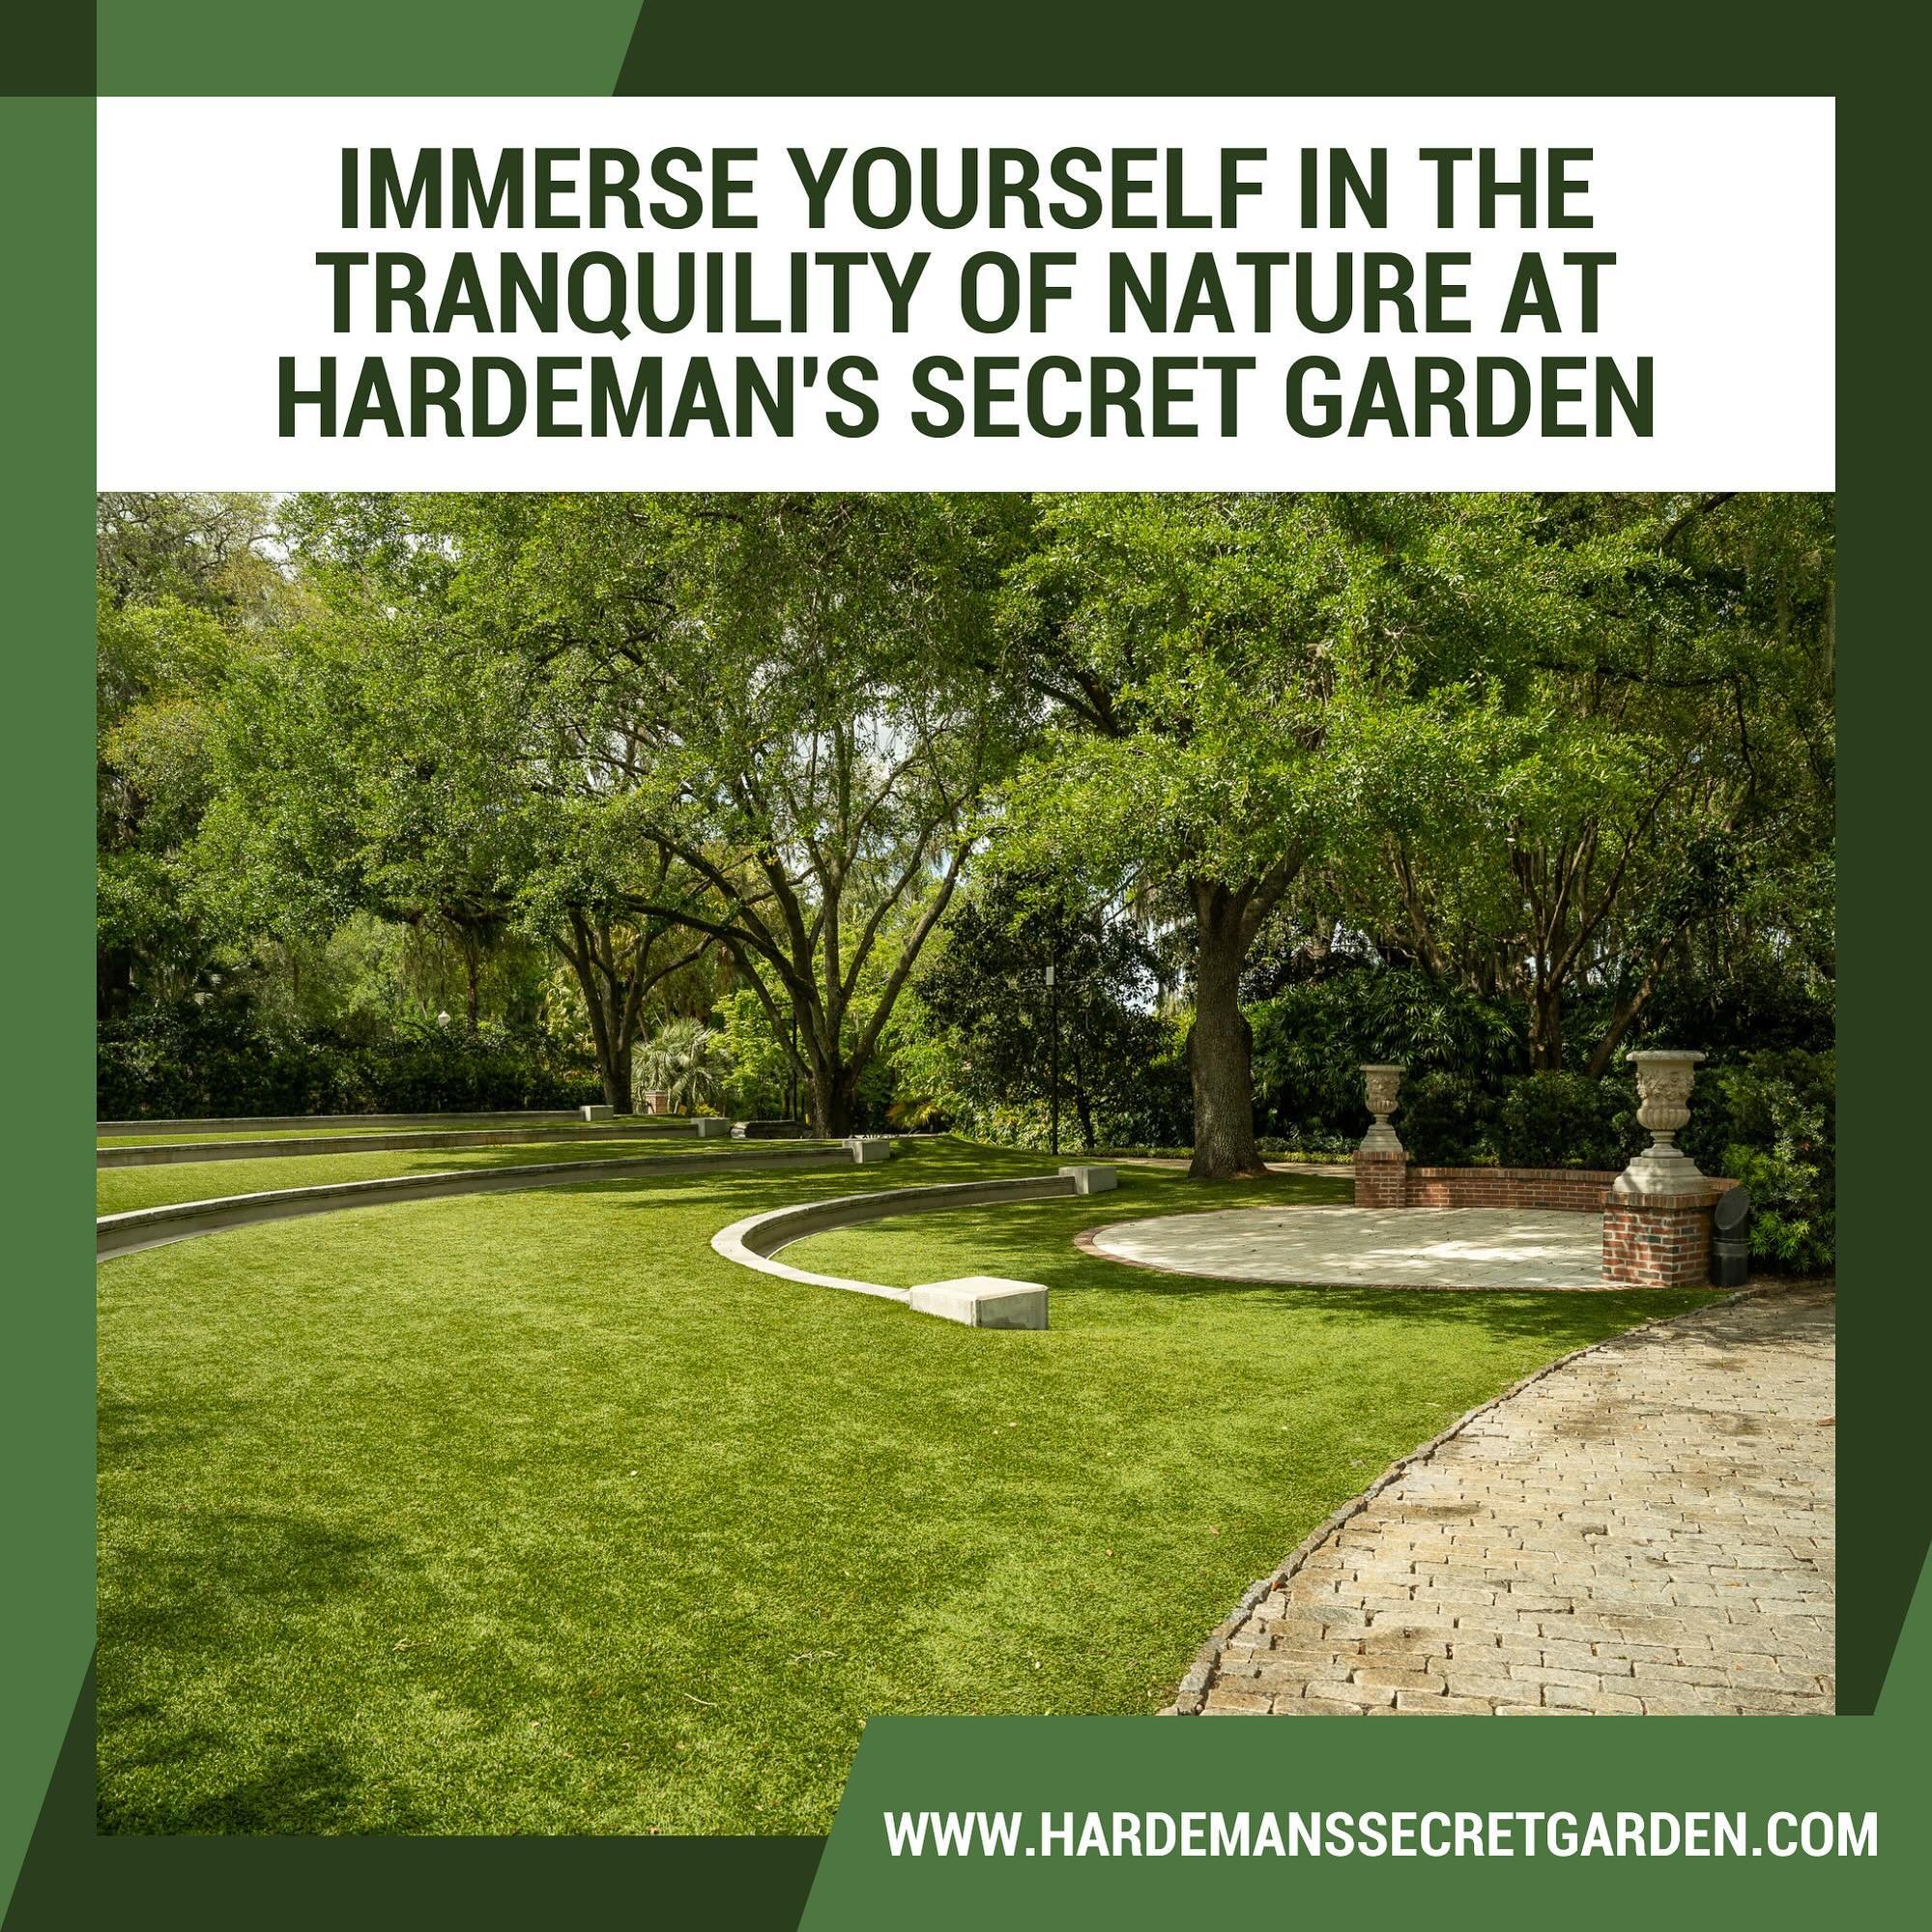 Immerse yourself in the tranquility of nature at Hardeman&rsquo;s Secret Garden, where every aspect is designed to evoke peace and harmony for your event. 

https://www.hardemanssecretgarden.com/
#hardemanssecretgarden #weddings #weddingreceptions #w